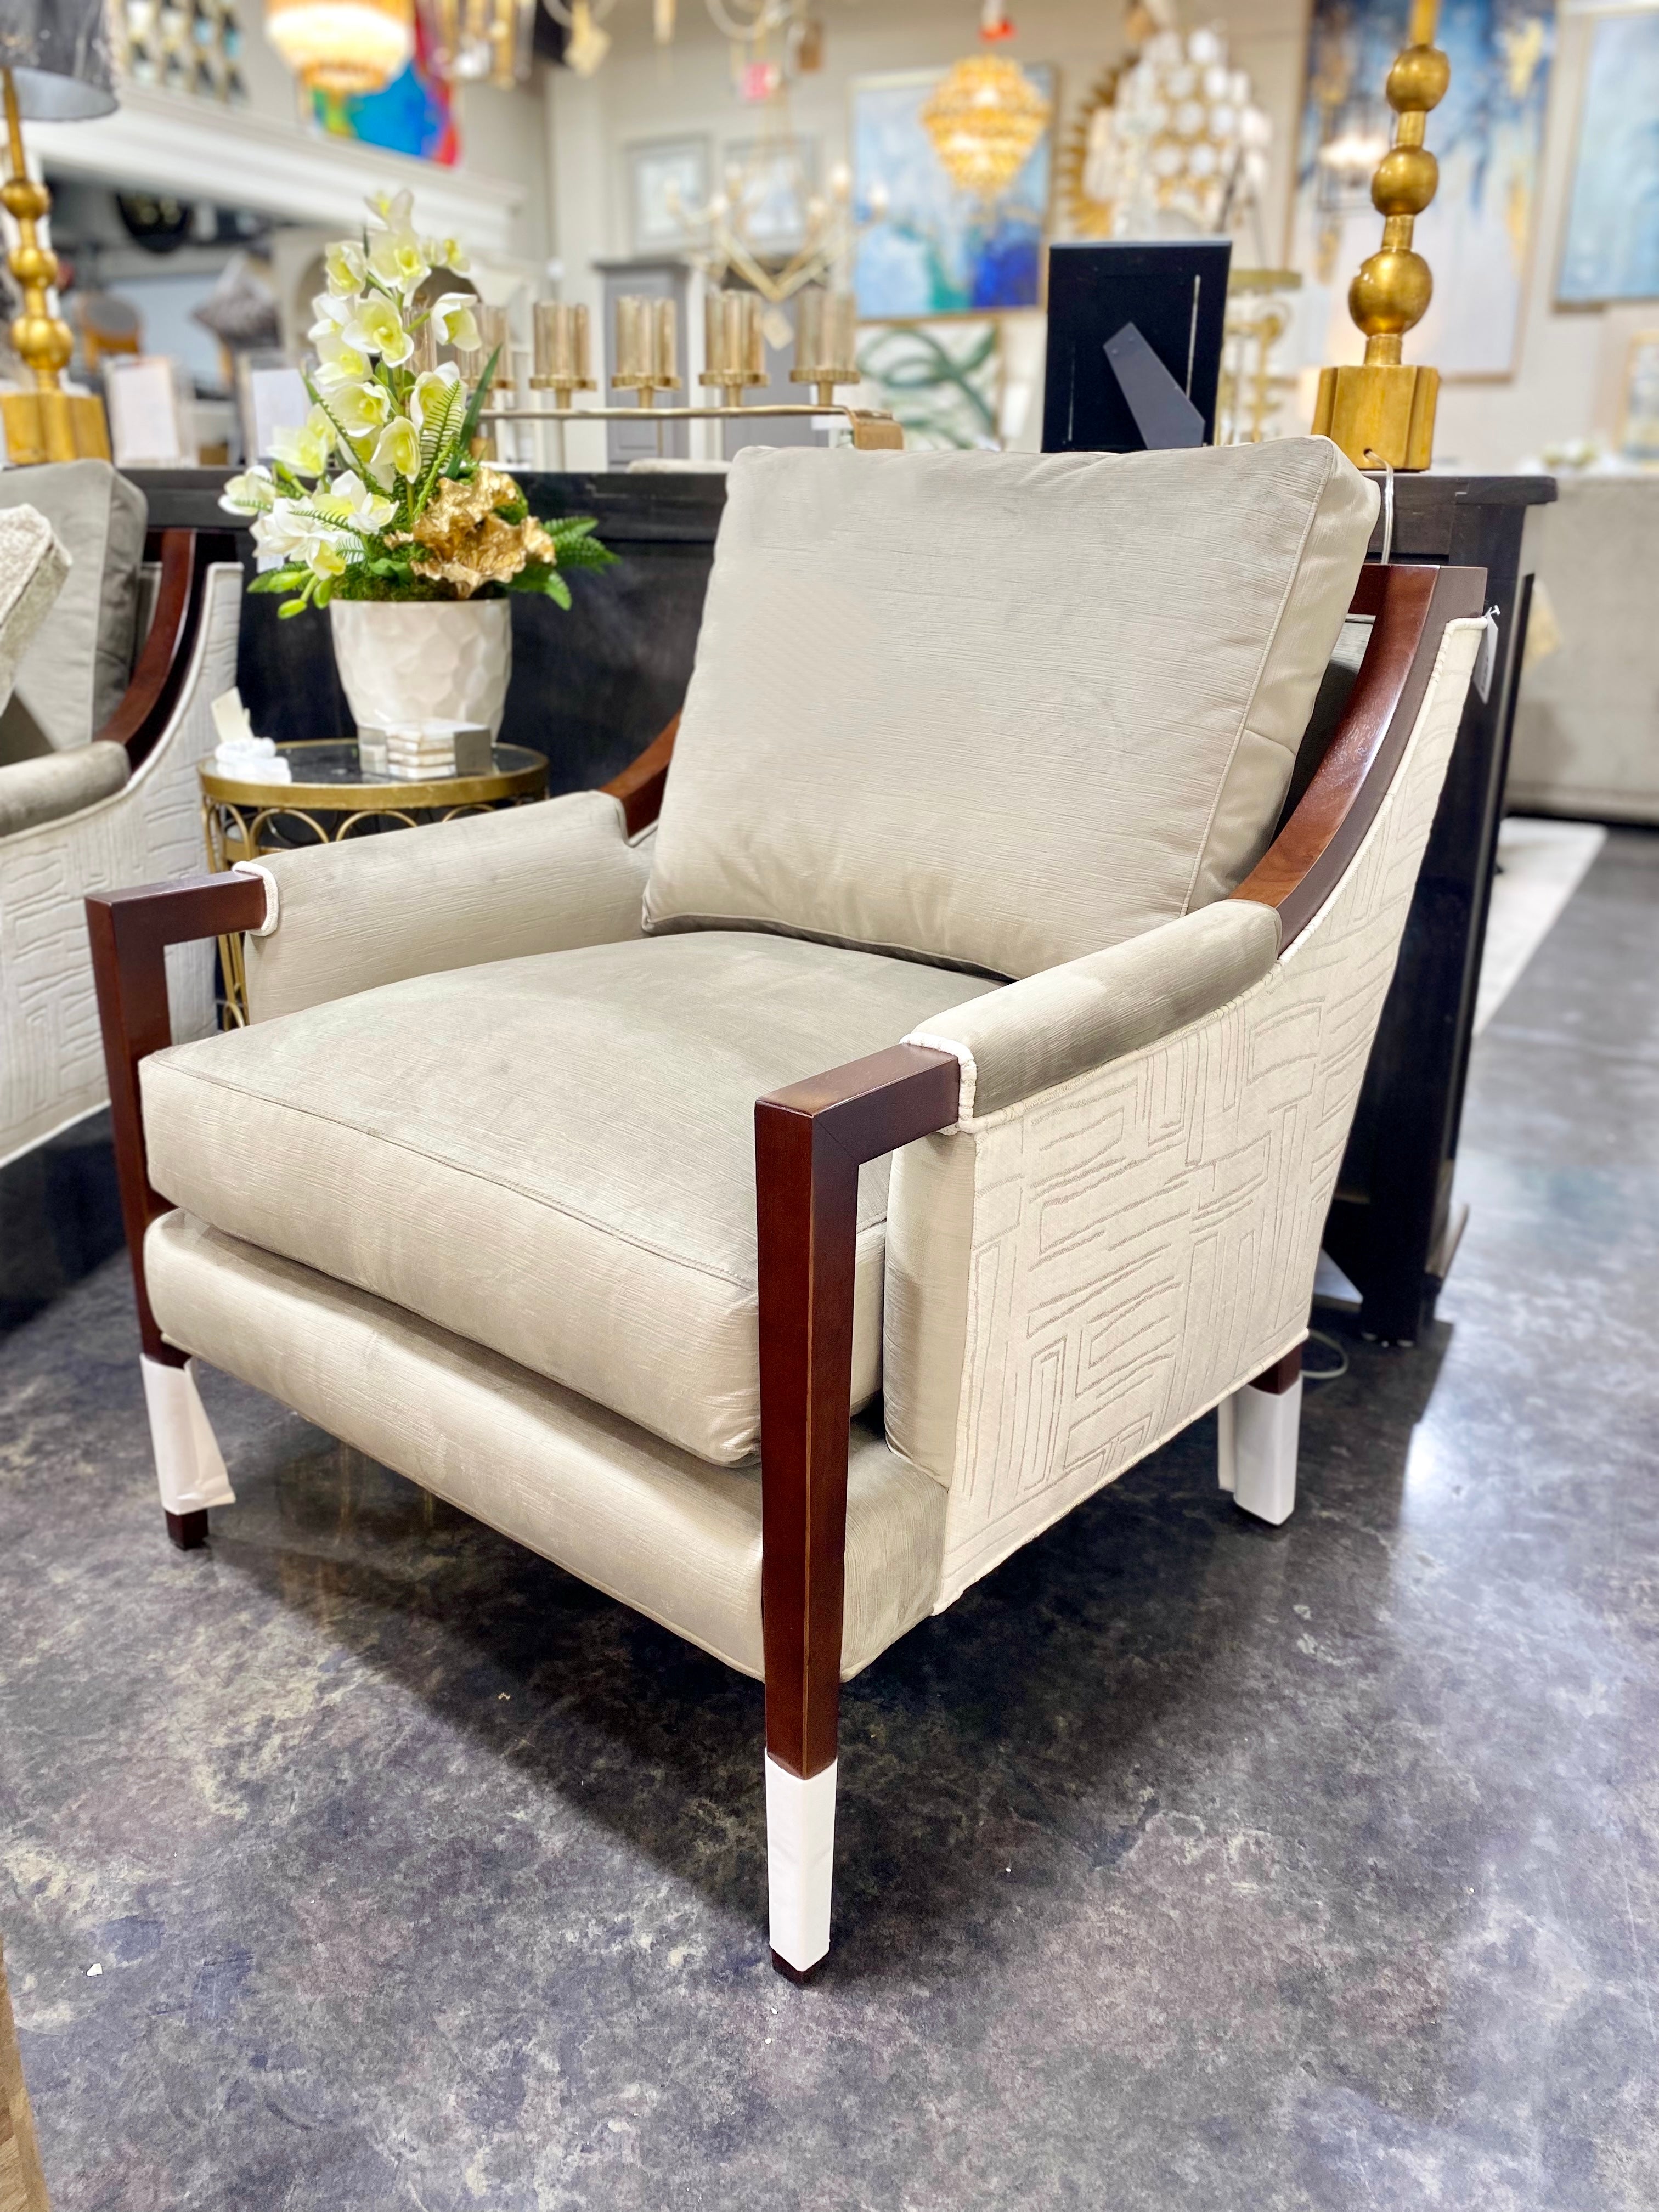 Craftmaster Beige and Cream Chair with Wood Trim